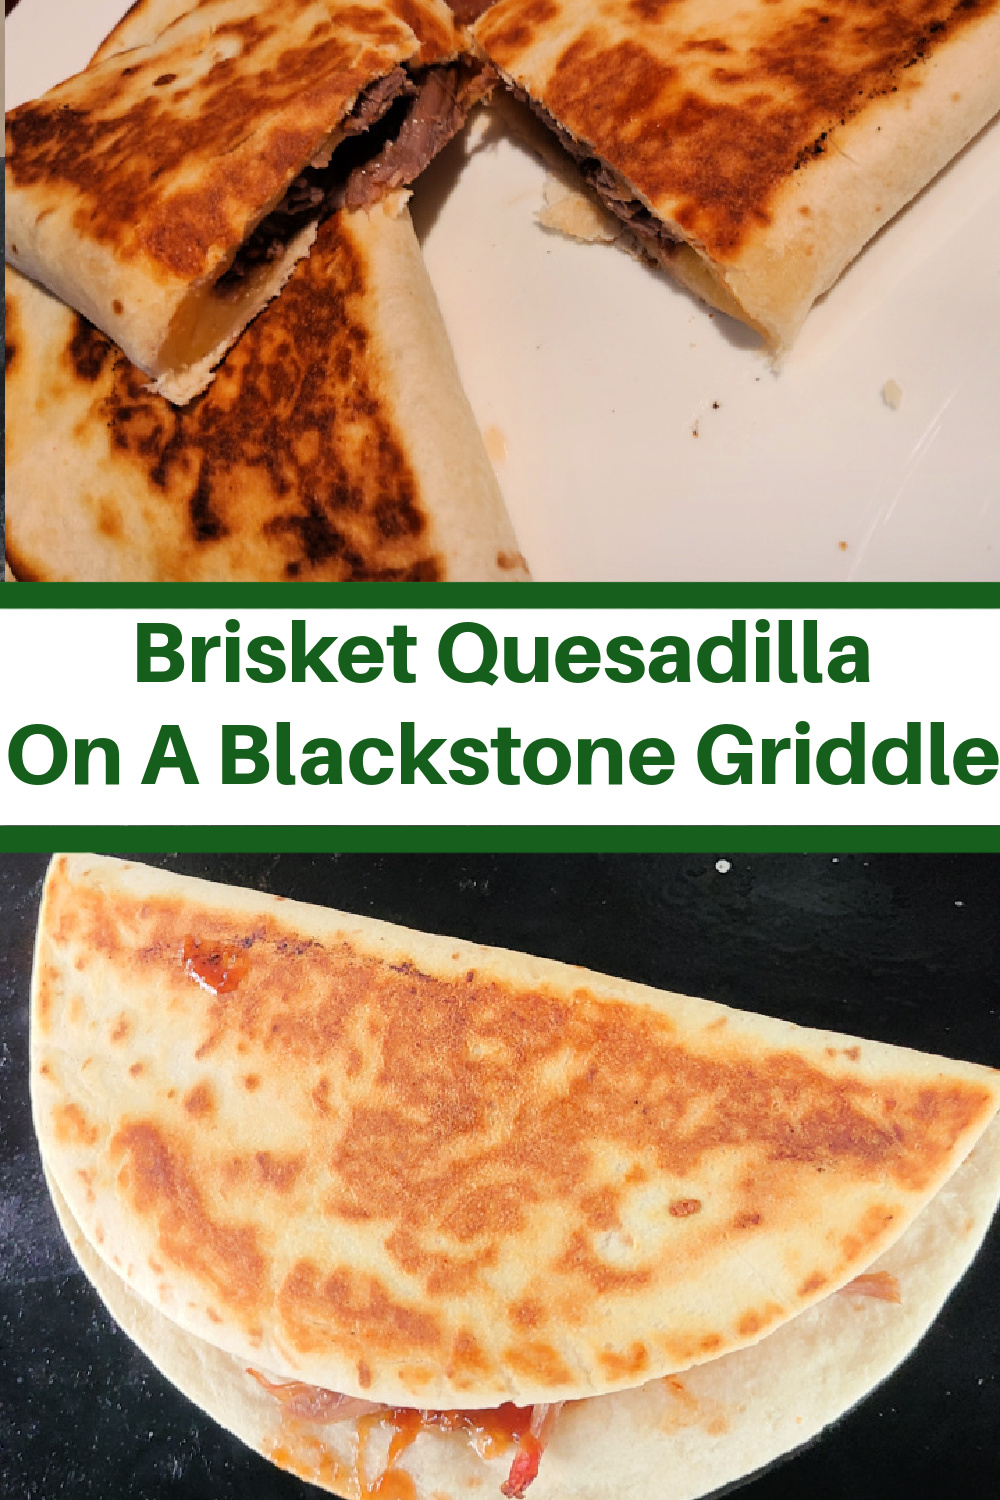 This Brisket Quesadilla is perfect to make on your Blackstone Griddle! Leftover smoked brisket recipes are always a hit and the easier the better! Add in bbq sauce to add more bbq flavor or a jalapeno sauce to kick up the flavor!